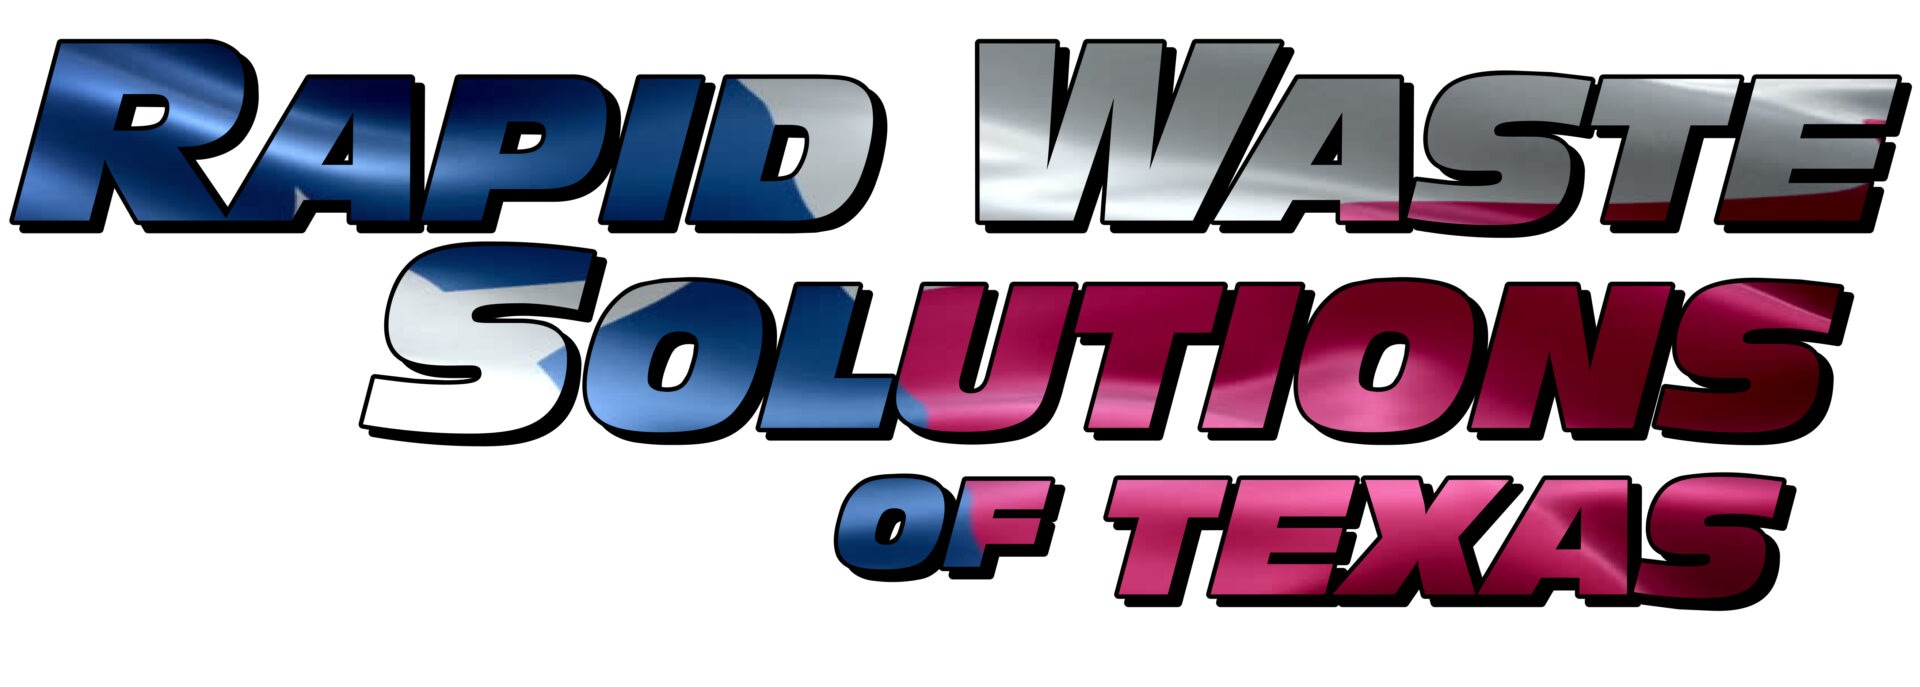 A logo for the land wars and revolution of texas.